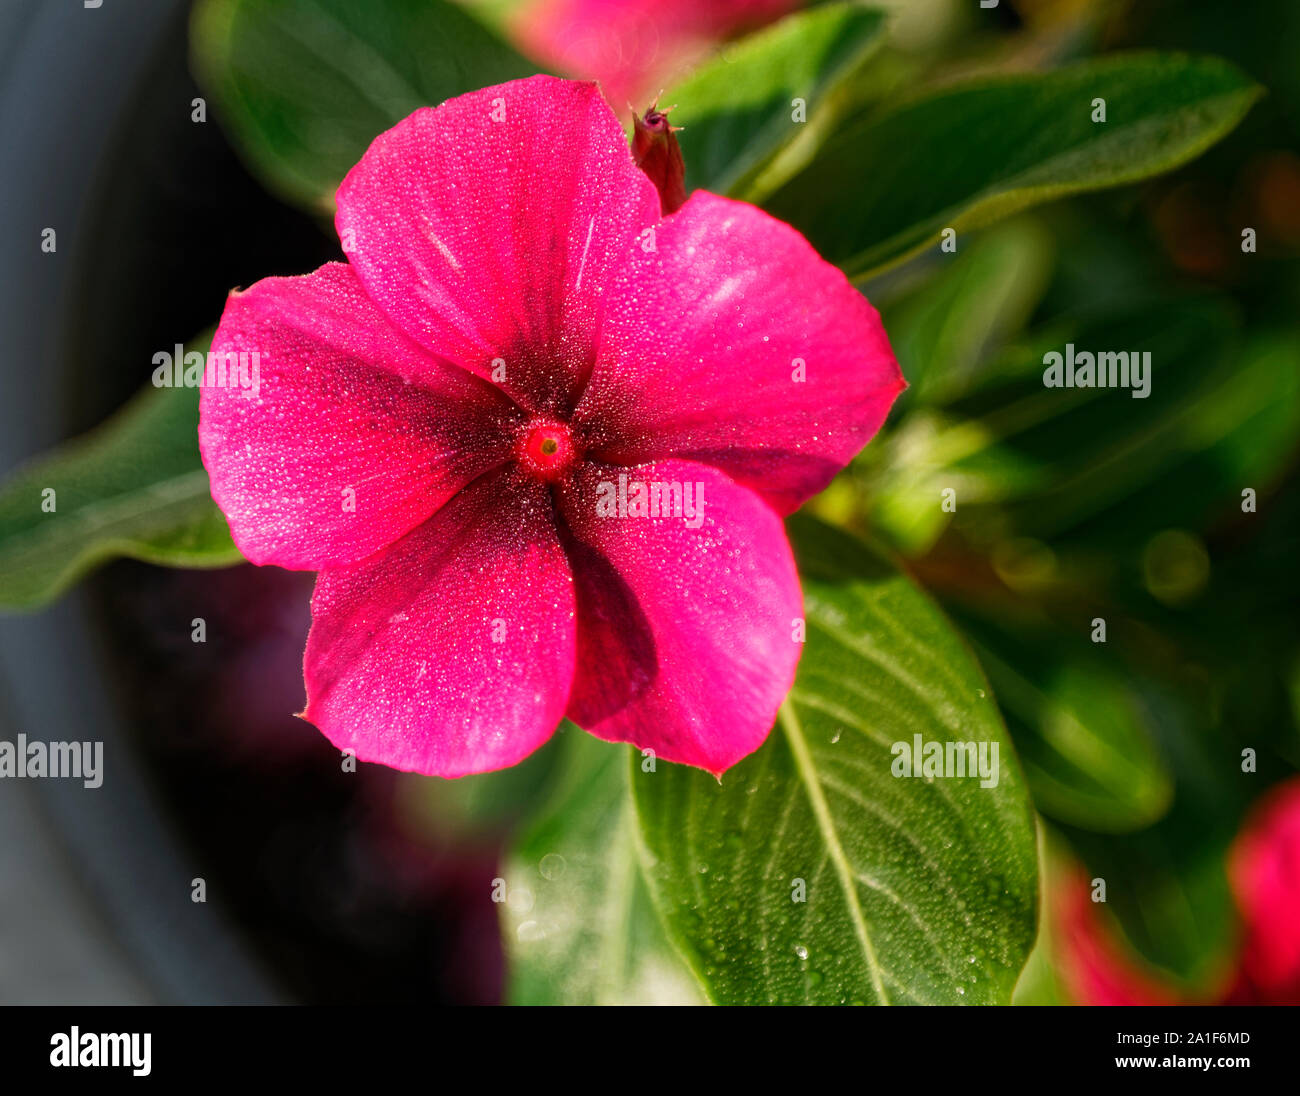 Vinca flower, cerise, Periwinkle, close-up, dew, water droplets, green leaves, cultivated, 5 petals, garden, perennial, family Apocynaceae; summer; ho Stock Photo